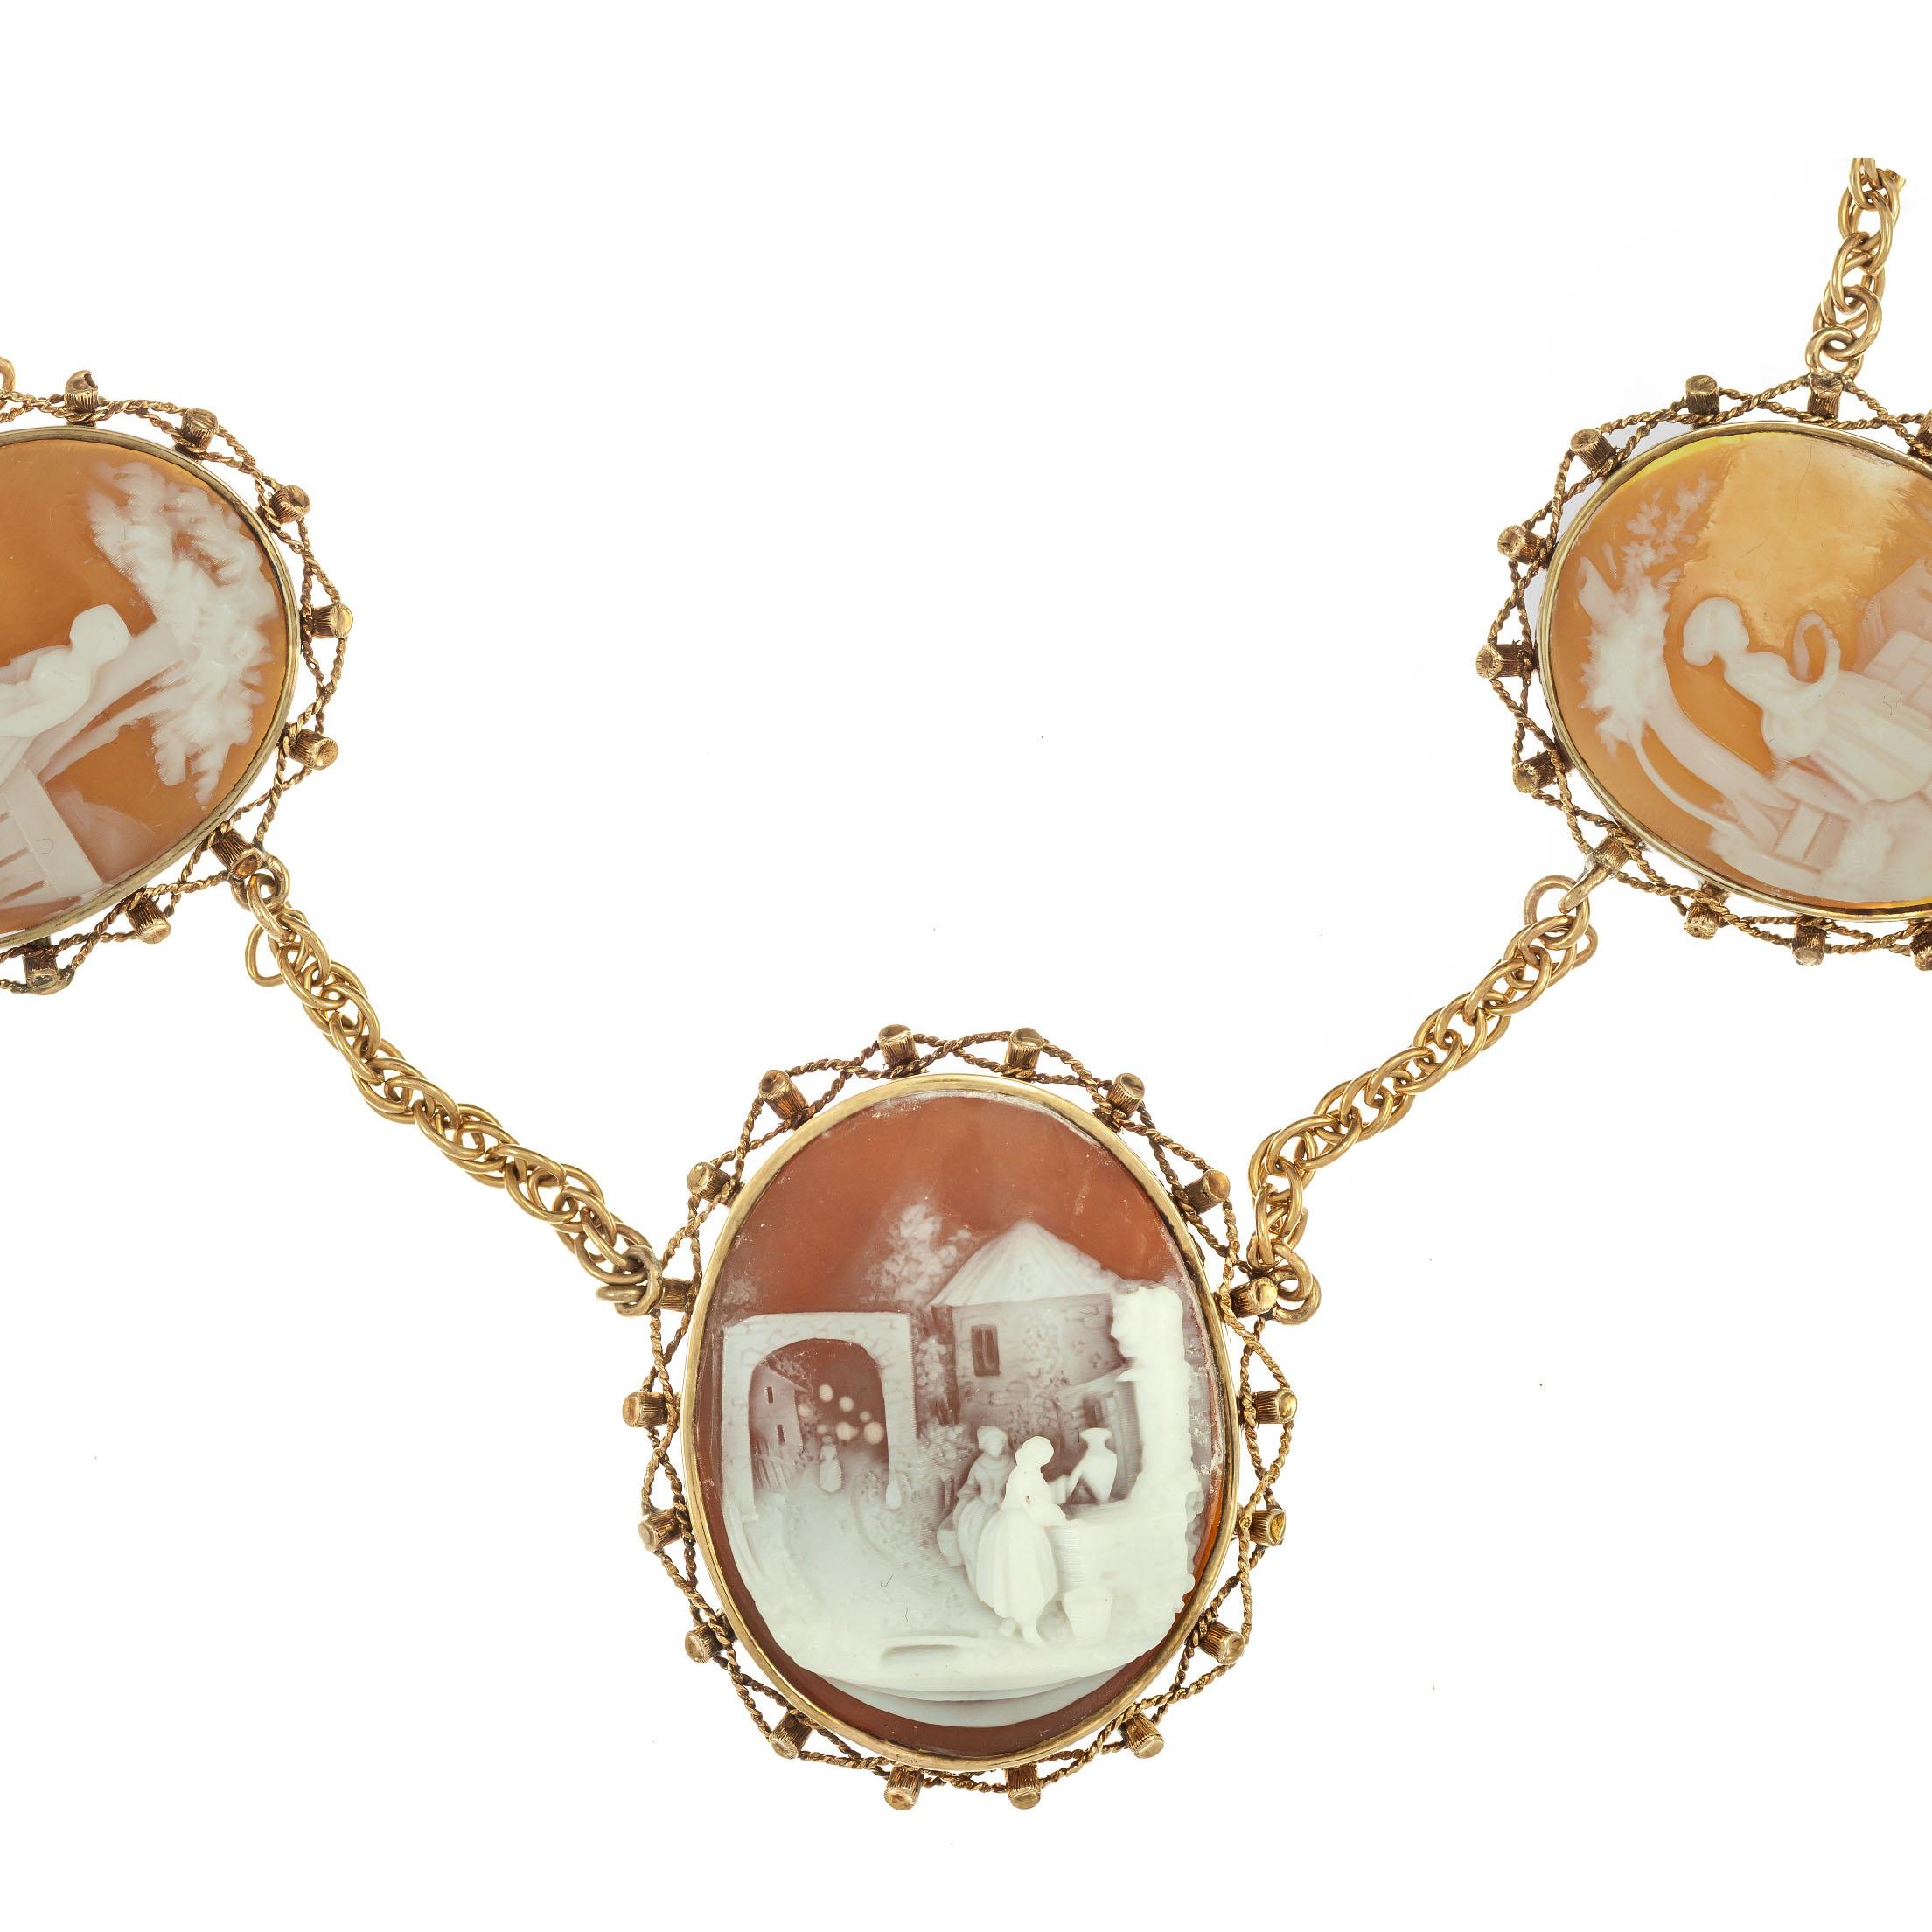 14k yellow gold graduated 5 Cameo necklace. The center Cameo and the 2 end Cameo's are from shells with a darker background color. Twisted wire frame borders around each cameo. 20 inch rope style chain. 

5 hand carved shell Cameo's.  34 x 26mm. (2)